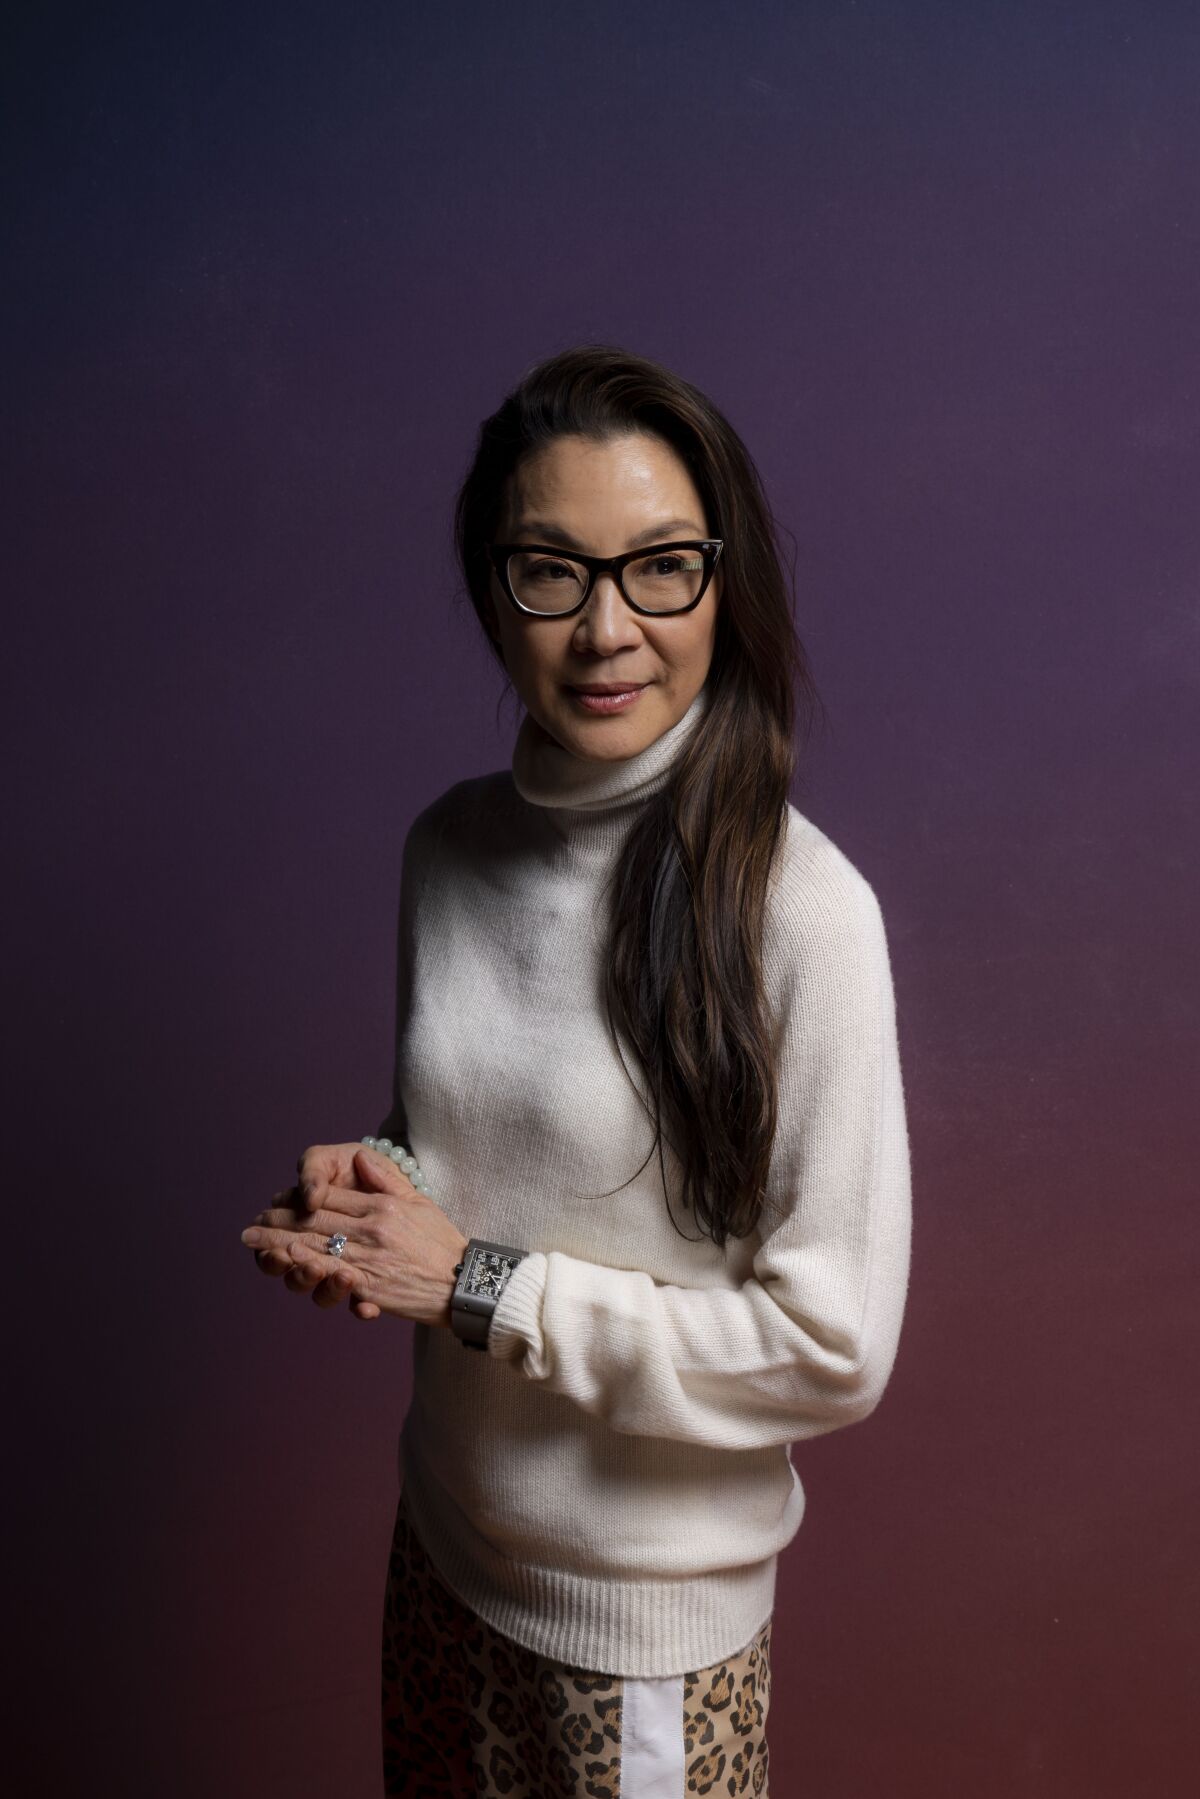 Woman with long dark hair wearing a white turtleneck sweater